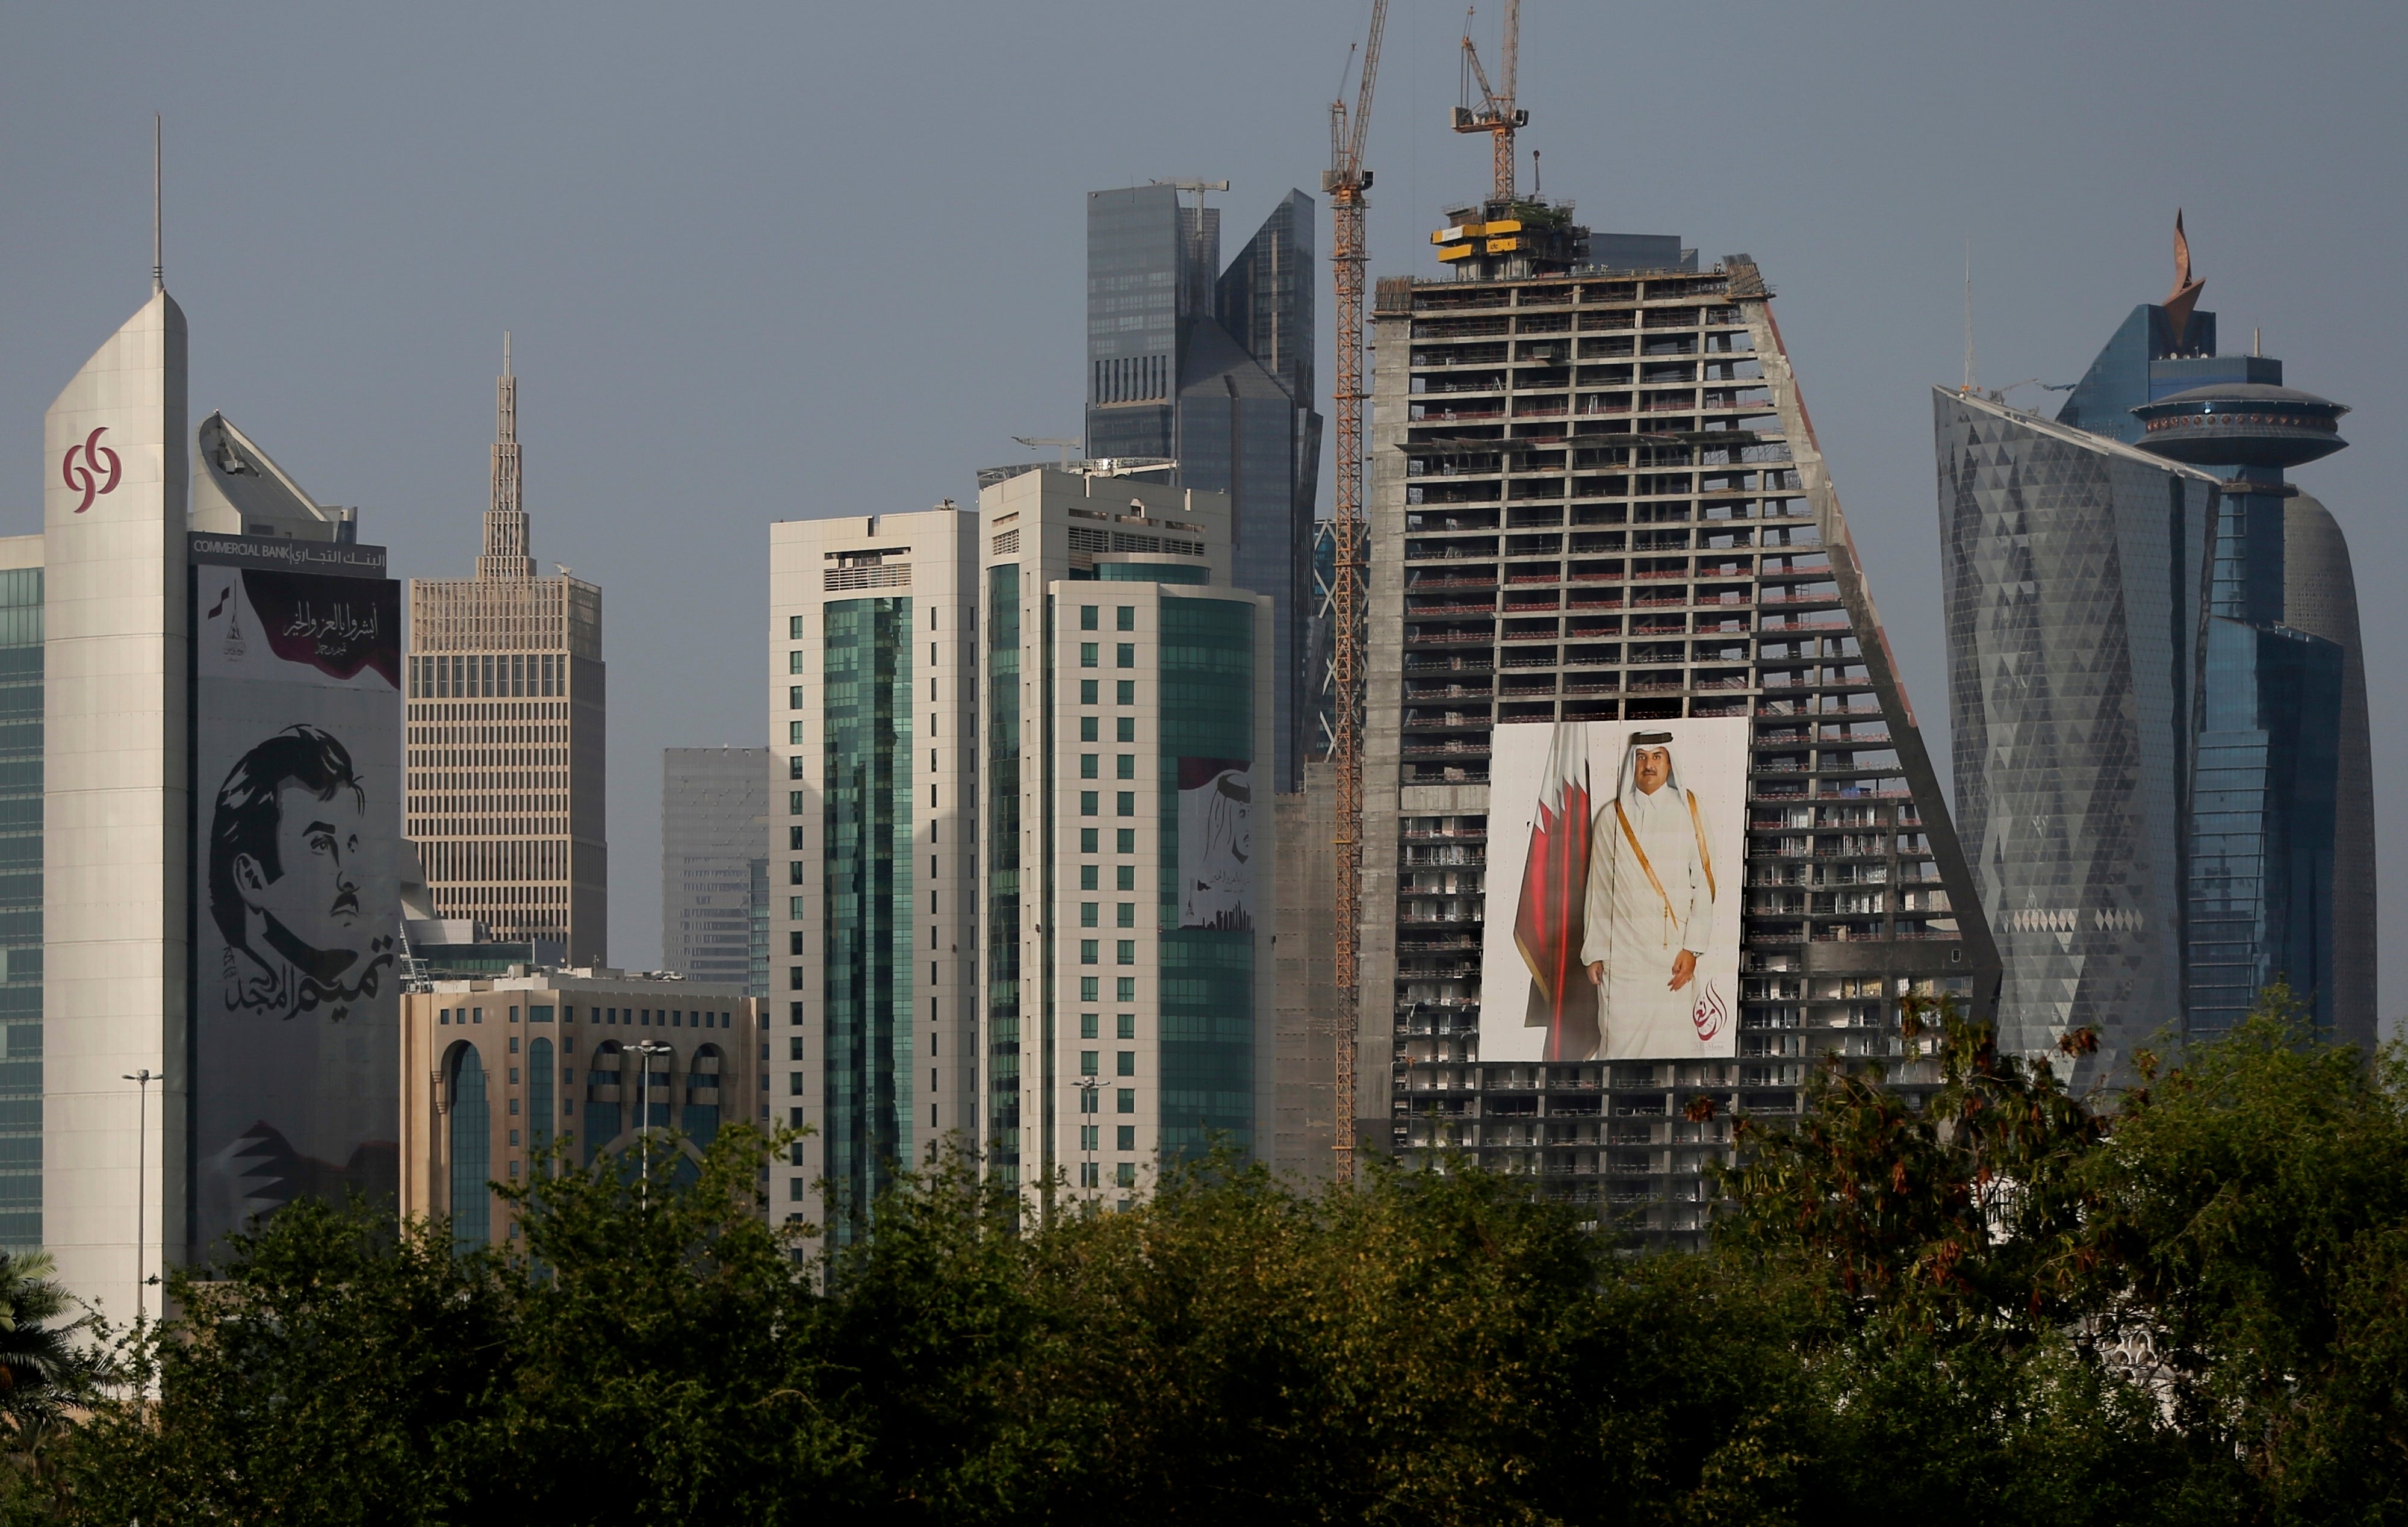 Images of the Emir of Qatar hang on towers in Doha